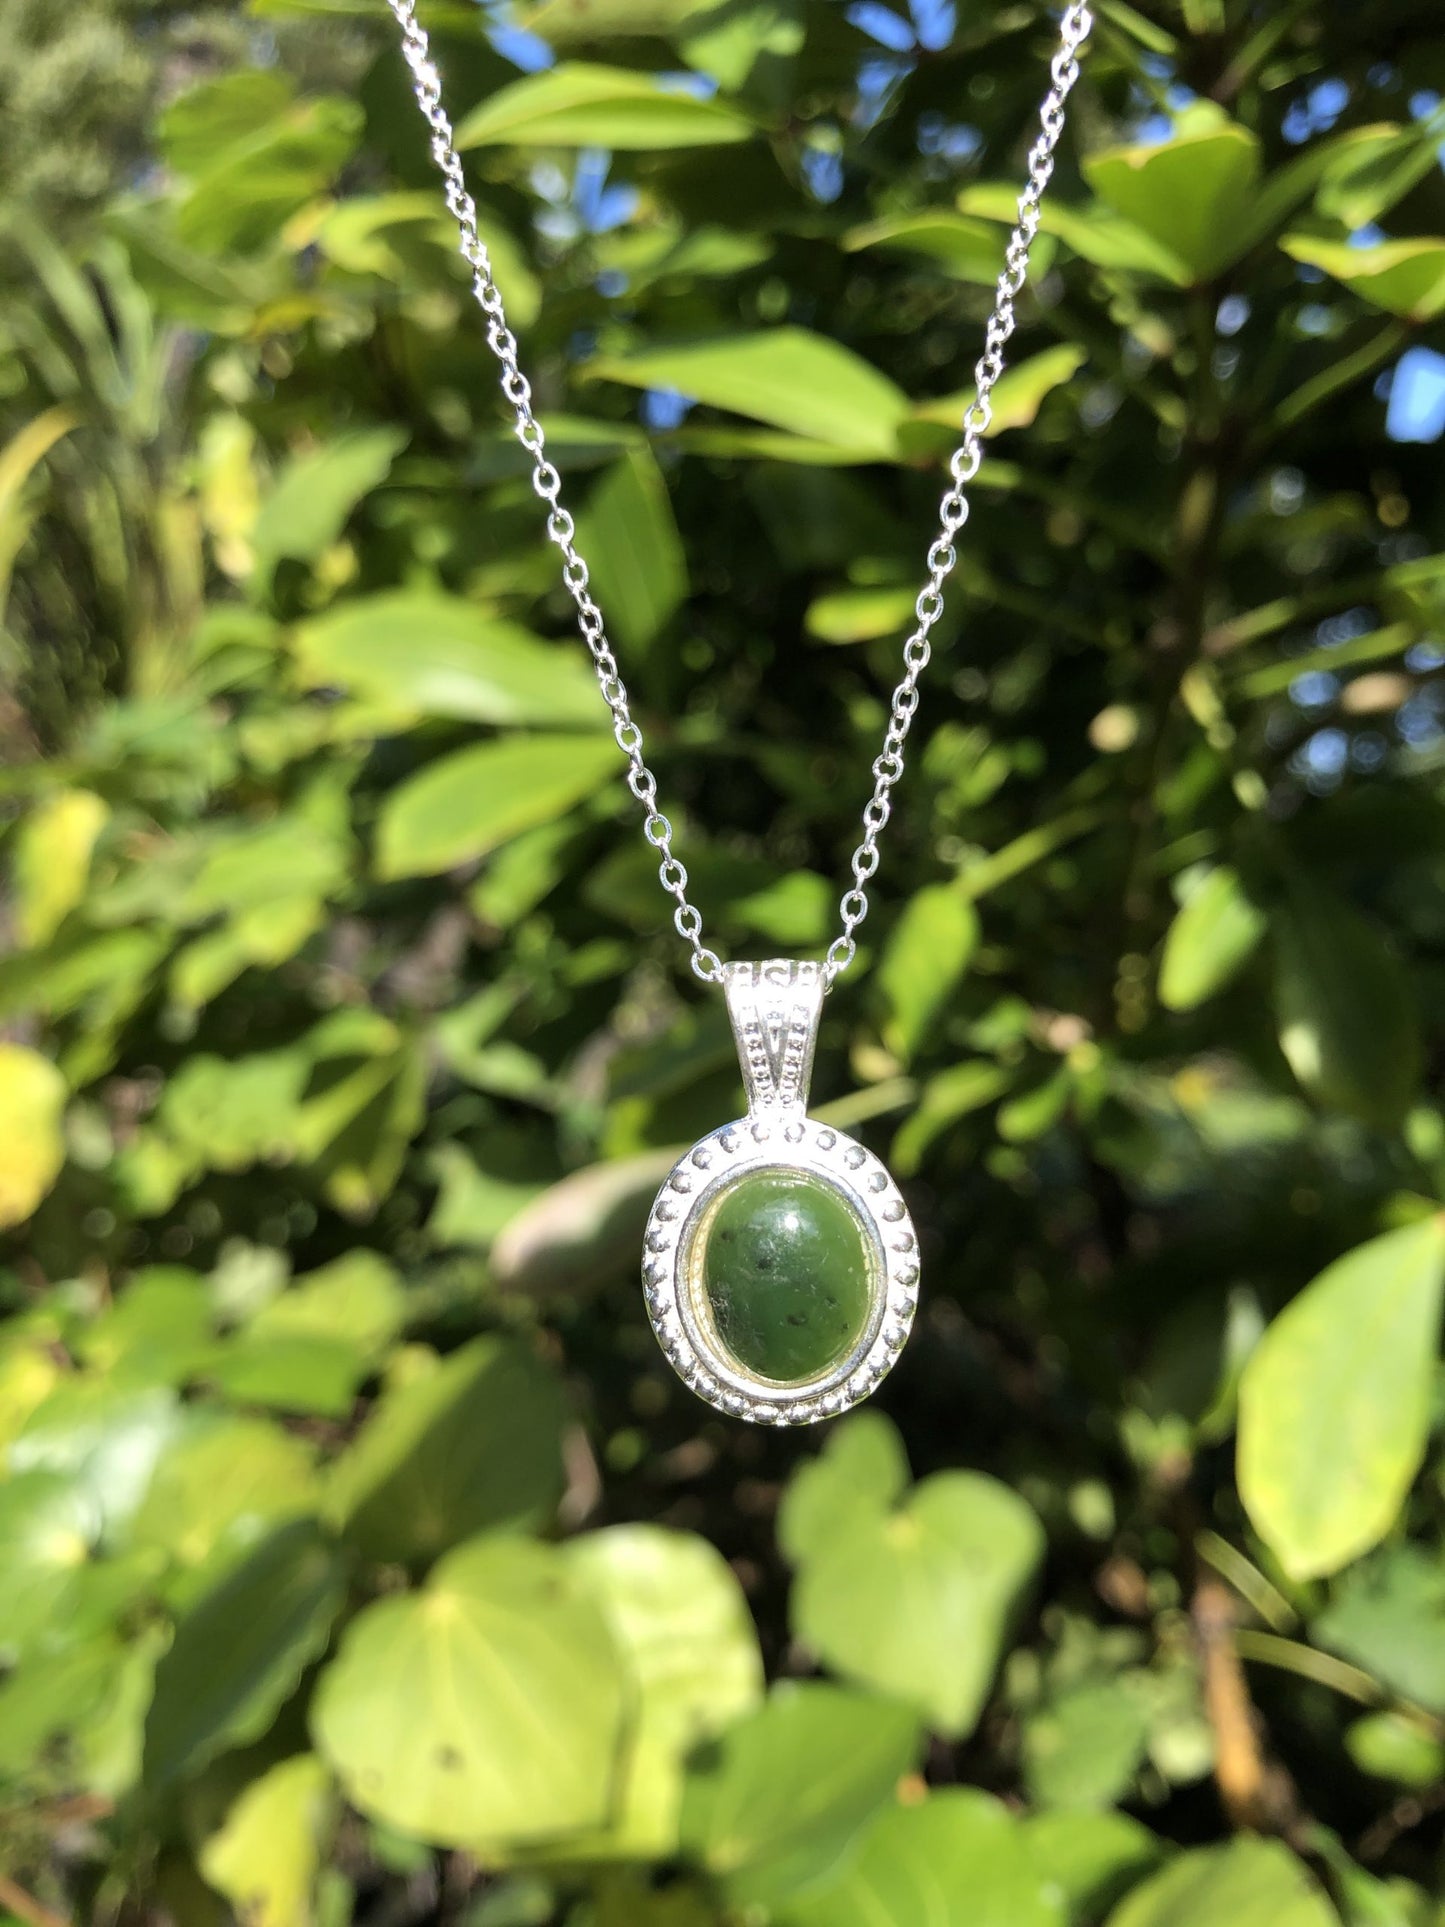 Necklace with New Zealand Pounamu (Greenstone, nephrite jade), bright green Kawakawa jade with subtle black marks, hand polished to an 12x10mm cabochon and mounted in a silver plated setting with 19 inch chain.